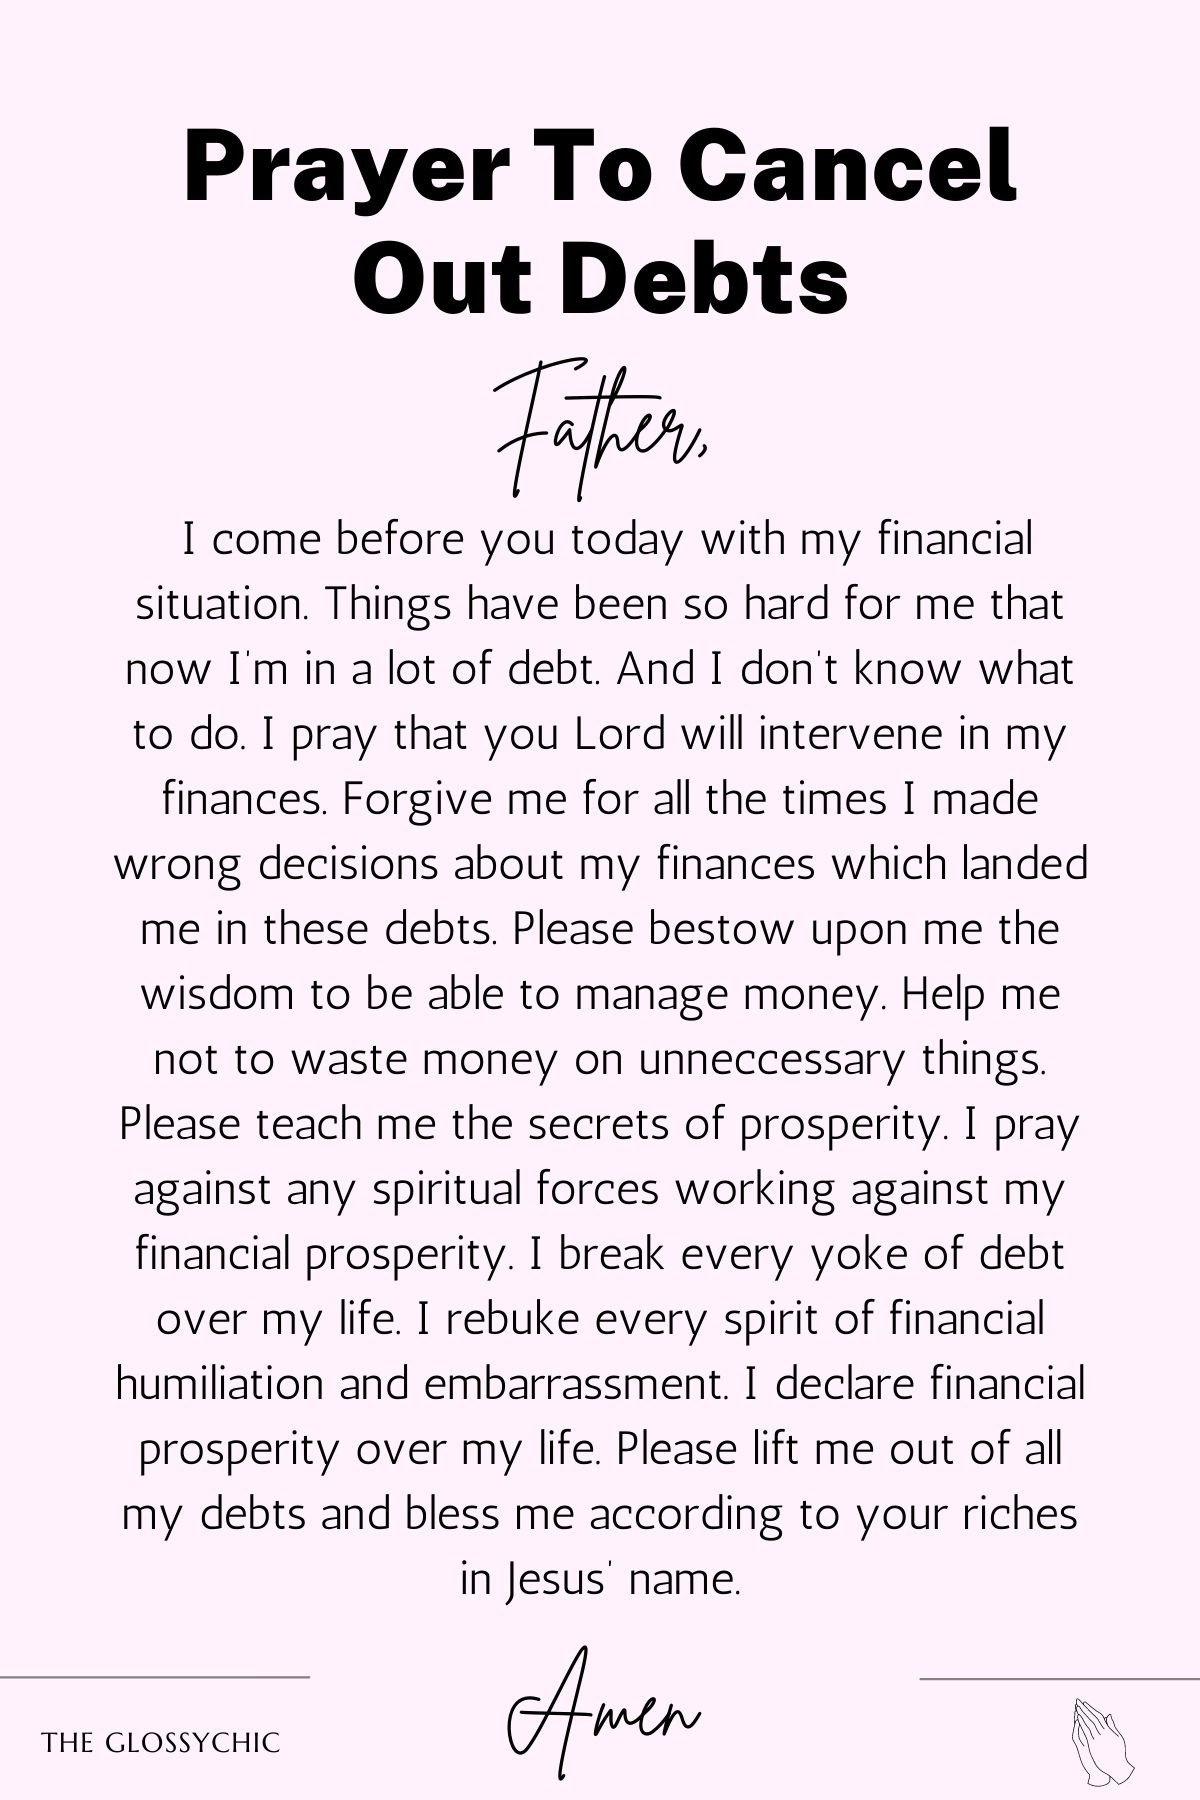 Prayer to cancel out debts